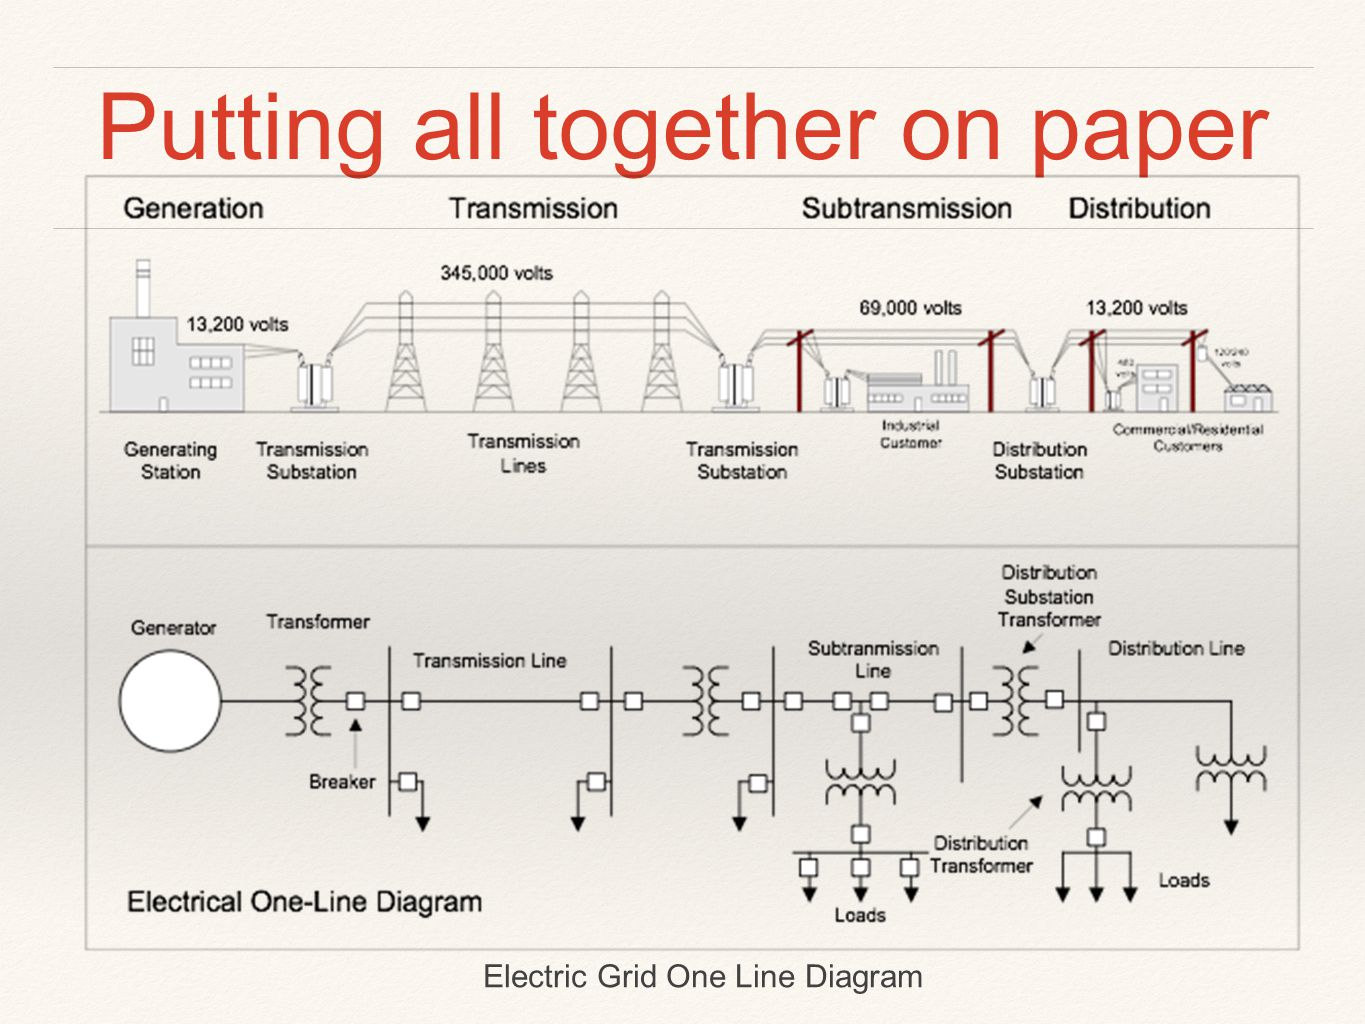 Putting all together on paper Electric Grid One Line Diagram